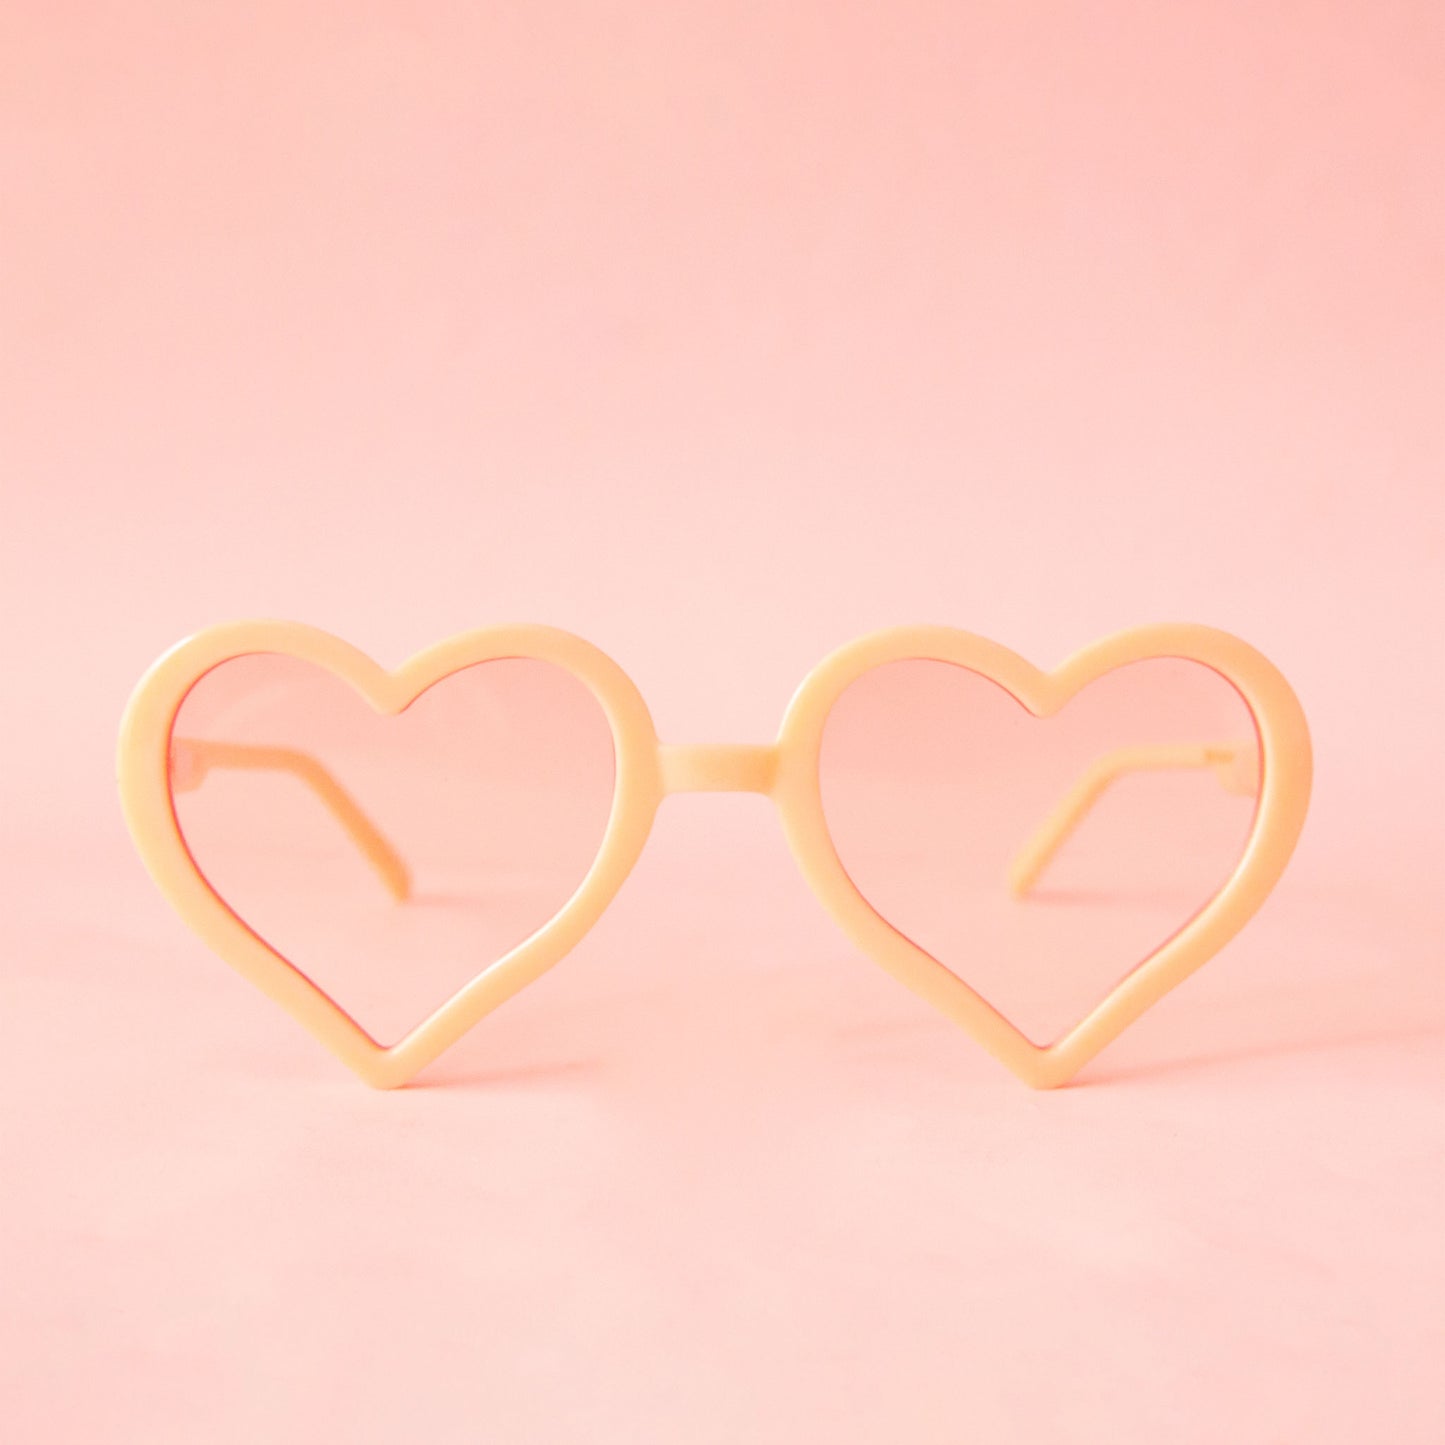 On a neutral background is a pair of apricot heart shaped glasses.